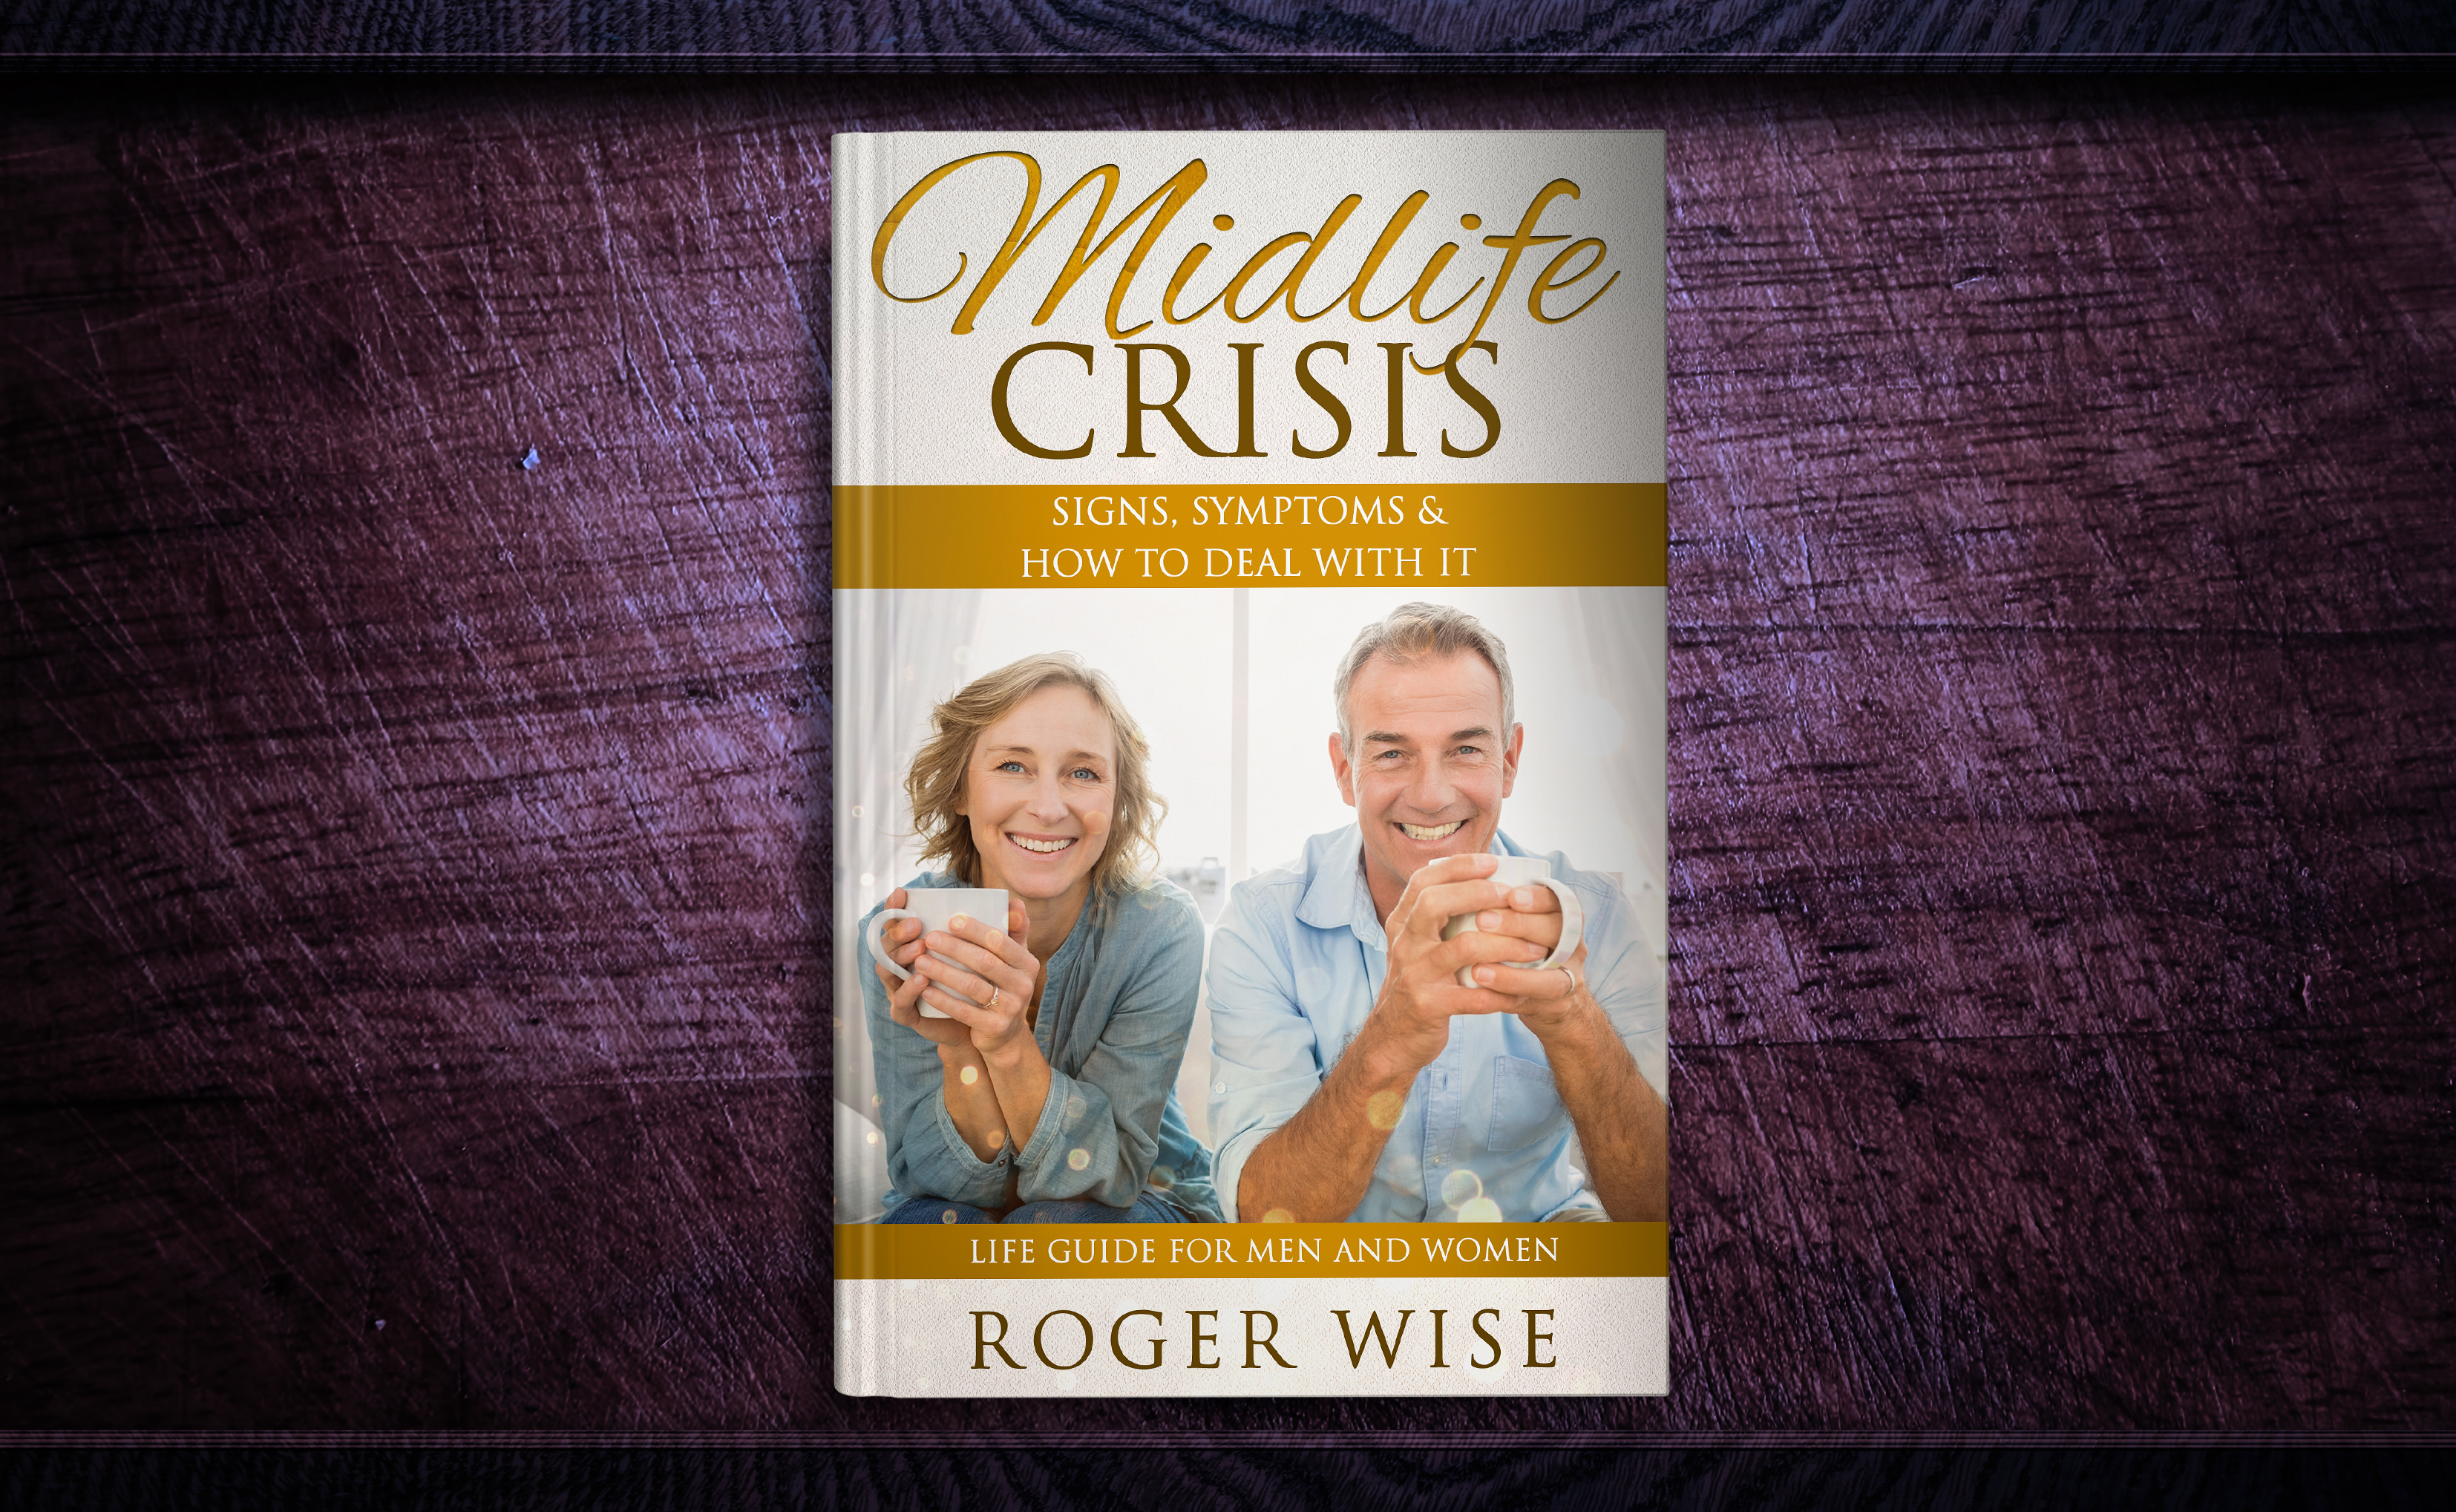 FREE: Midlife Crisis: Signs, Symptoms & How to Deal with It – Life Guide for Men and Women by Roger Wise